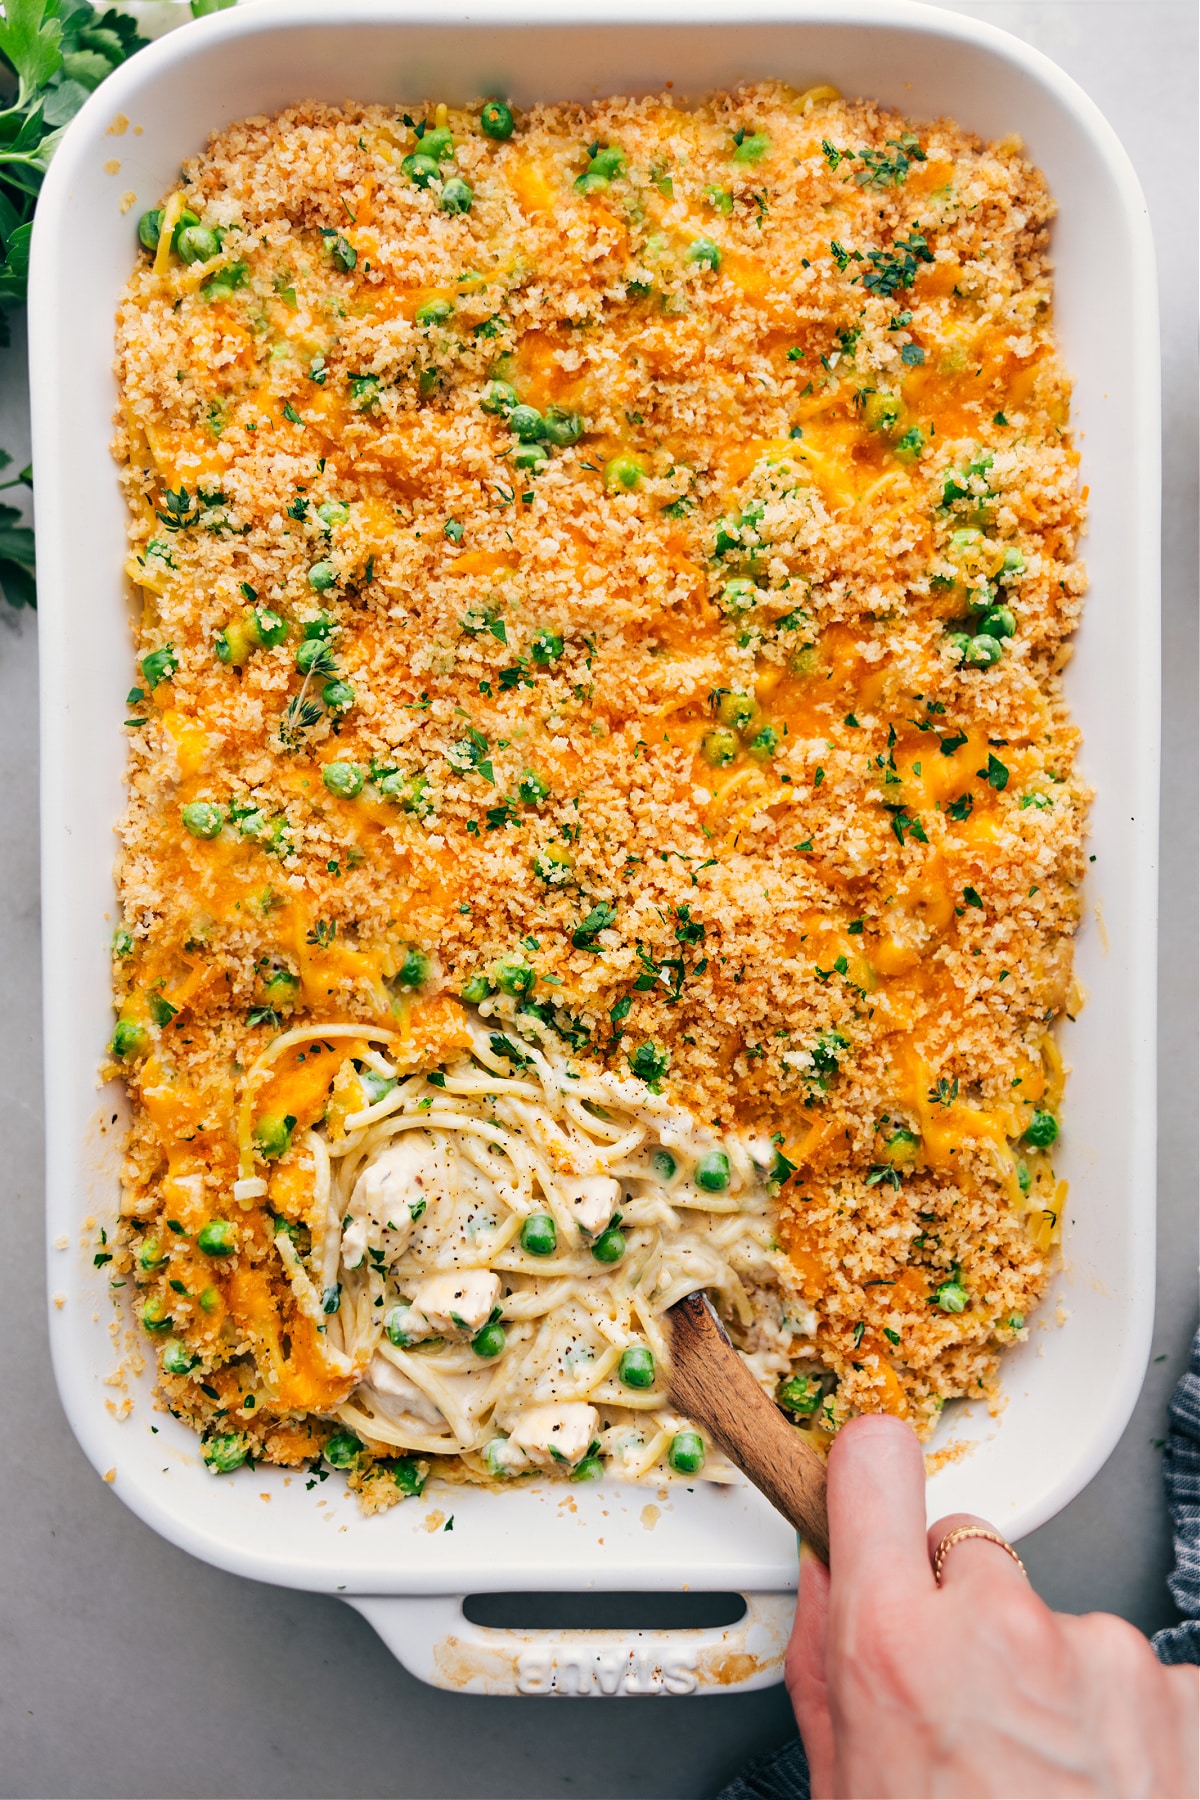 Delicious casserole of chicken tetrazzini with a crispy, flavorful top ready to be enjoyed.